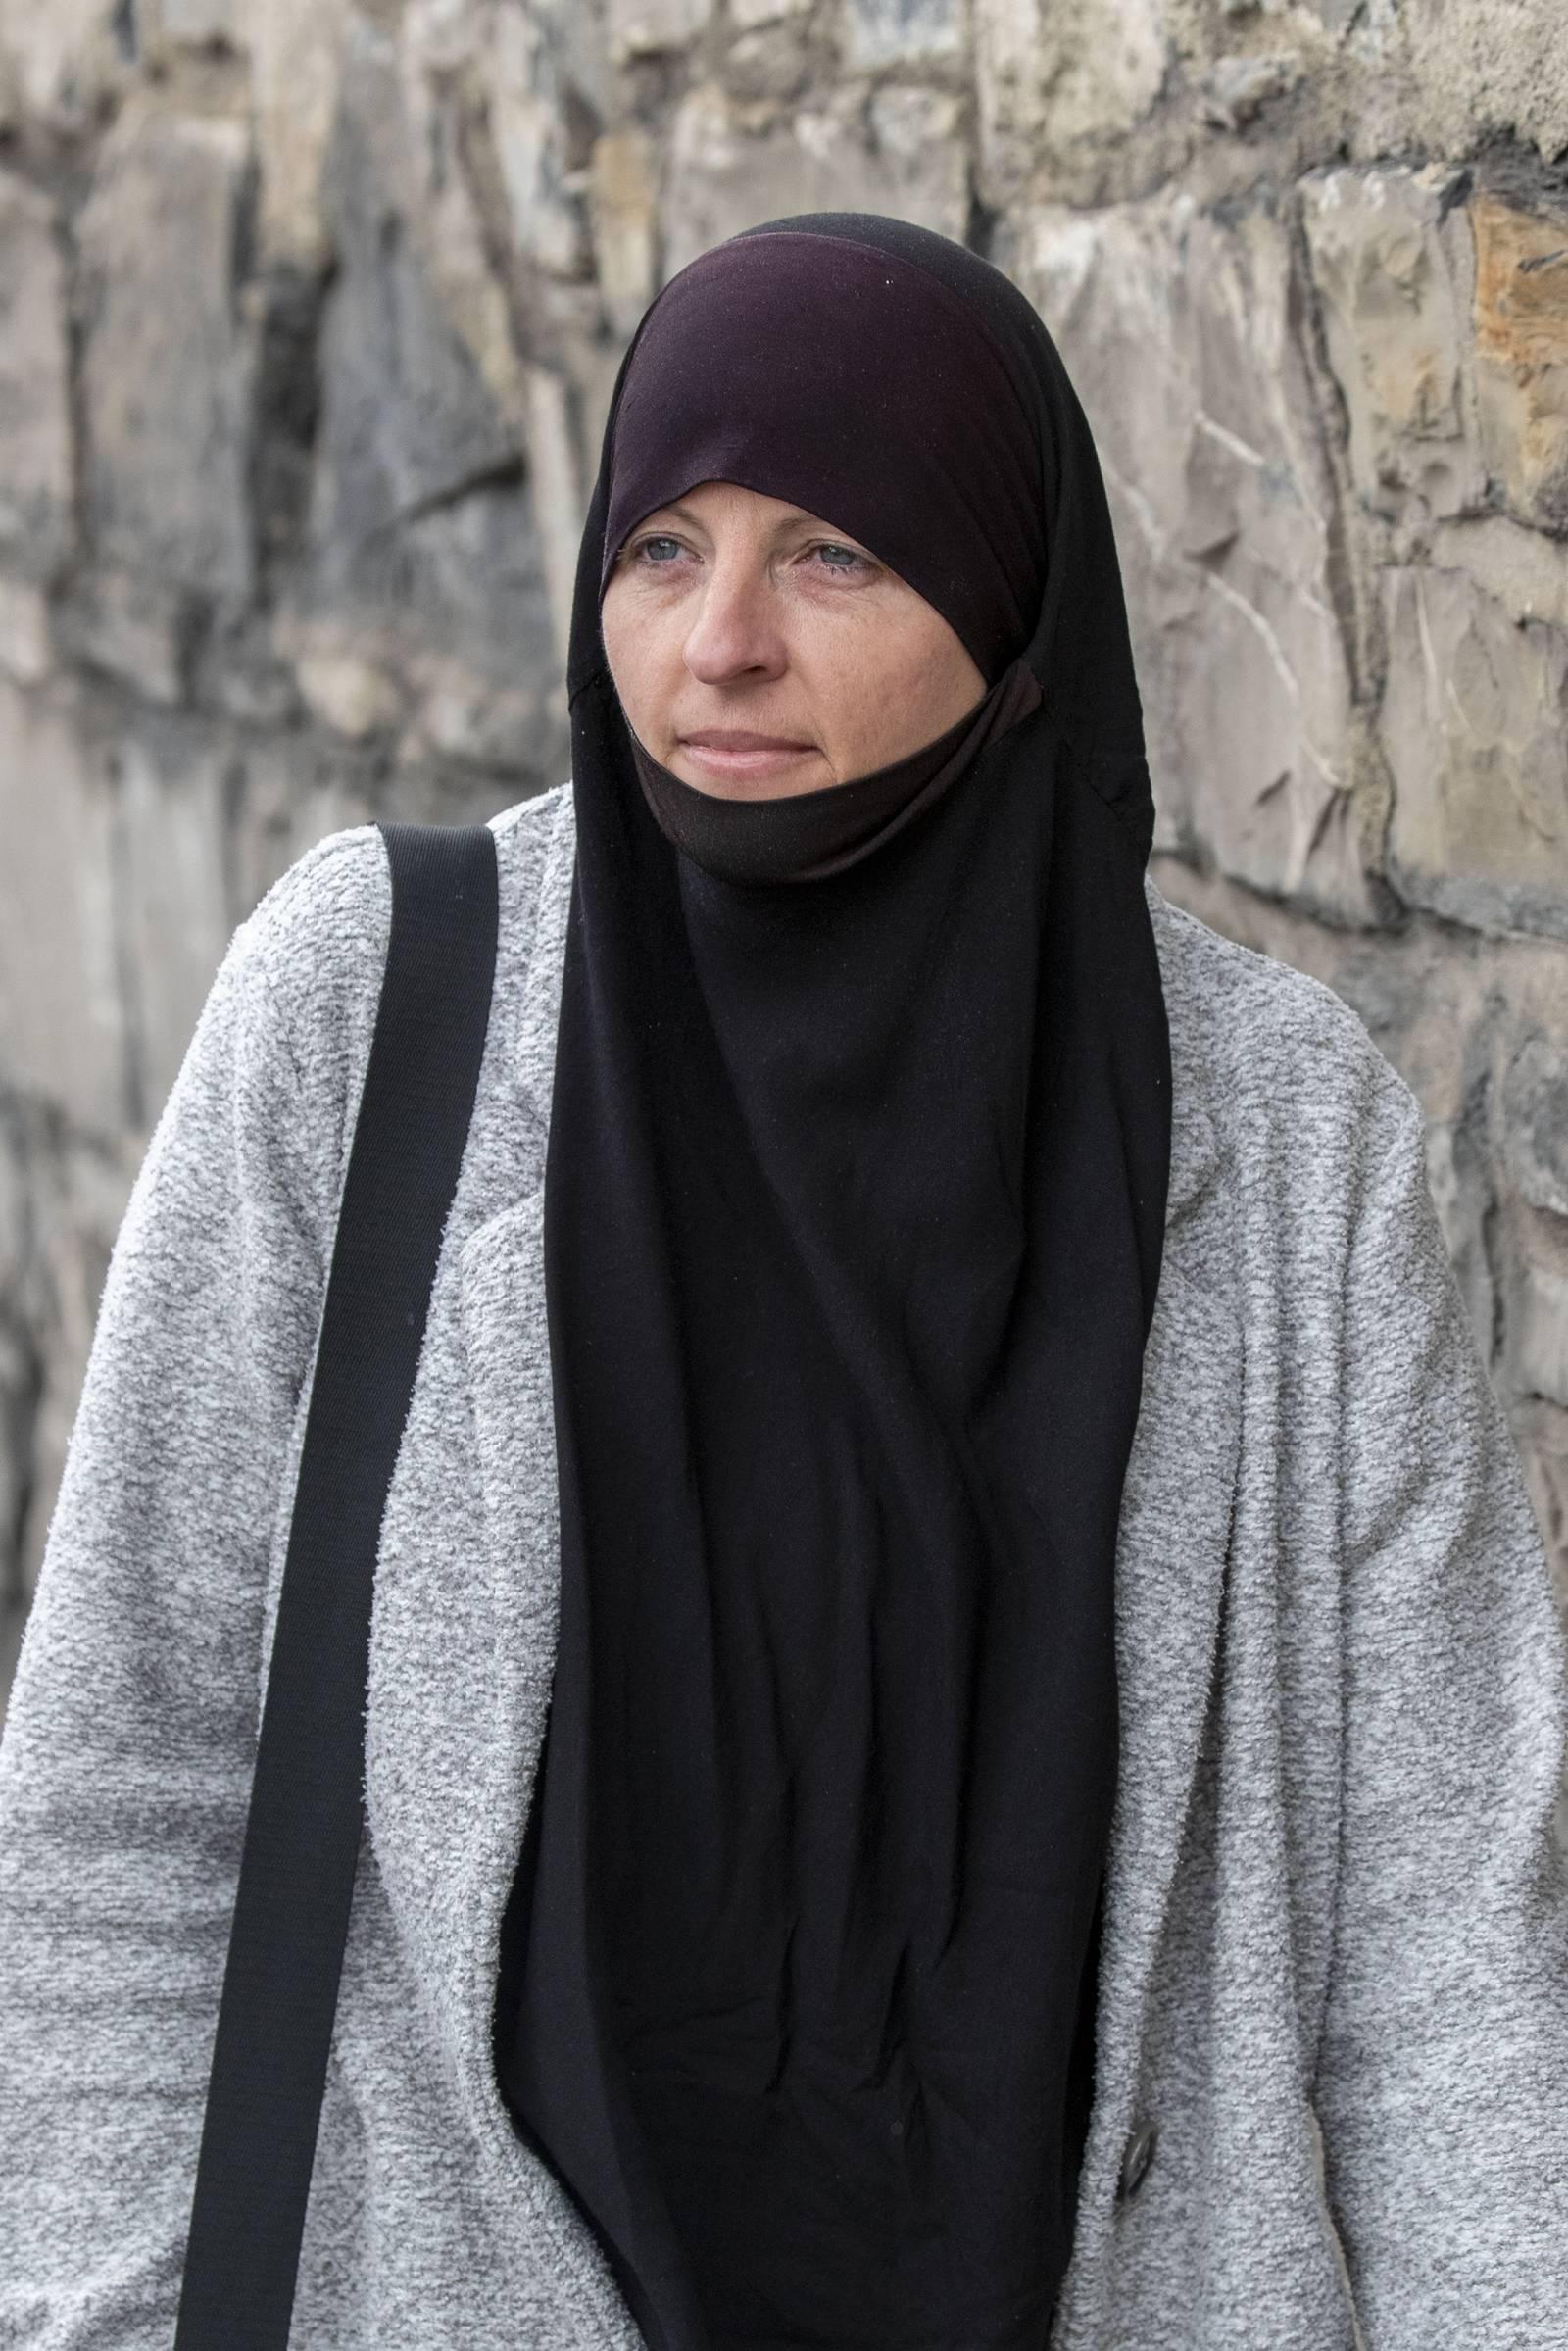 GFATF - LLL - Lisa Smith faces up to eight years in prison for Islamic State membership